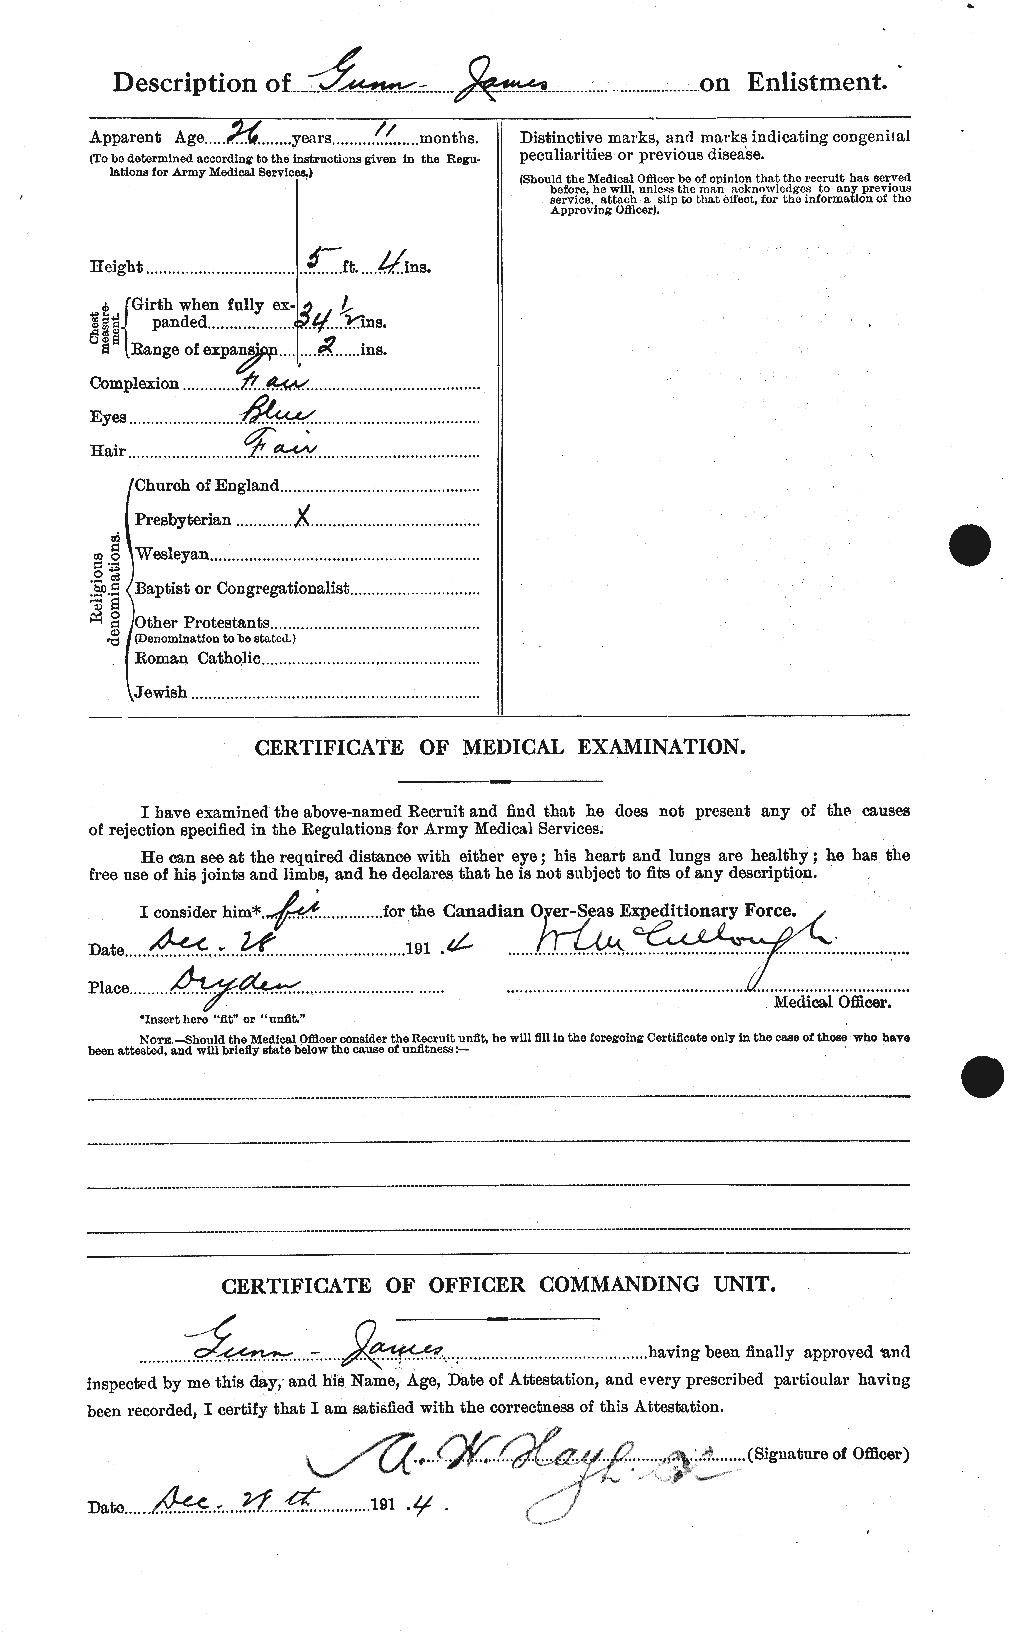 Personnel Records of the First World War - CEF 369267b